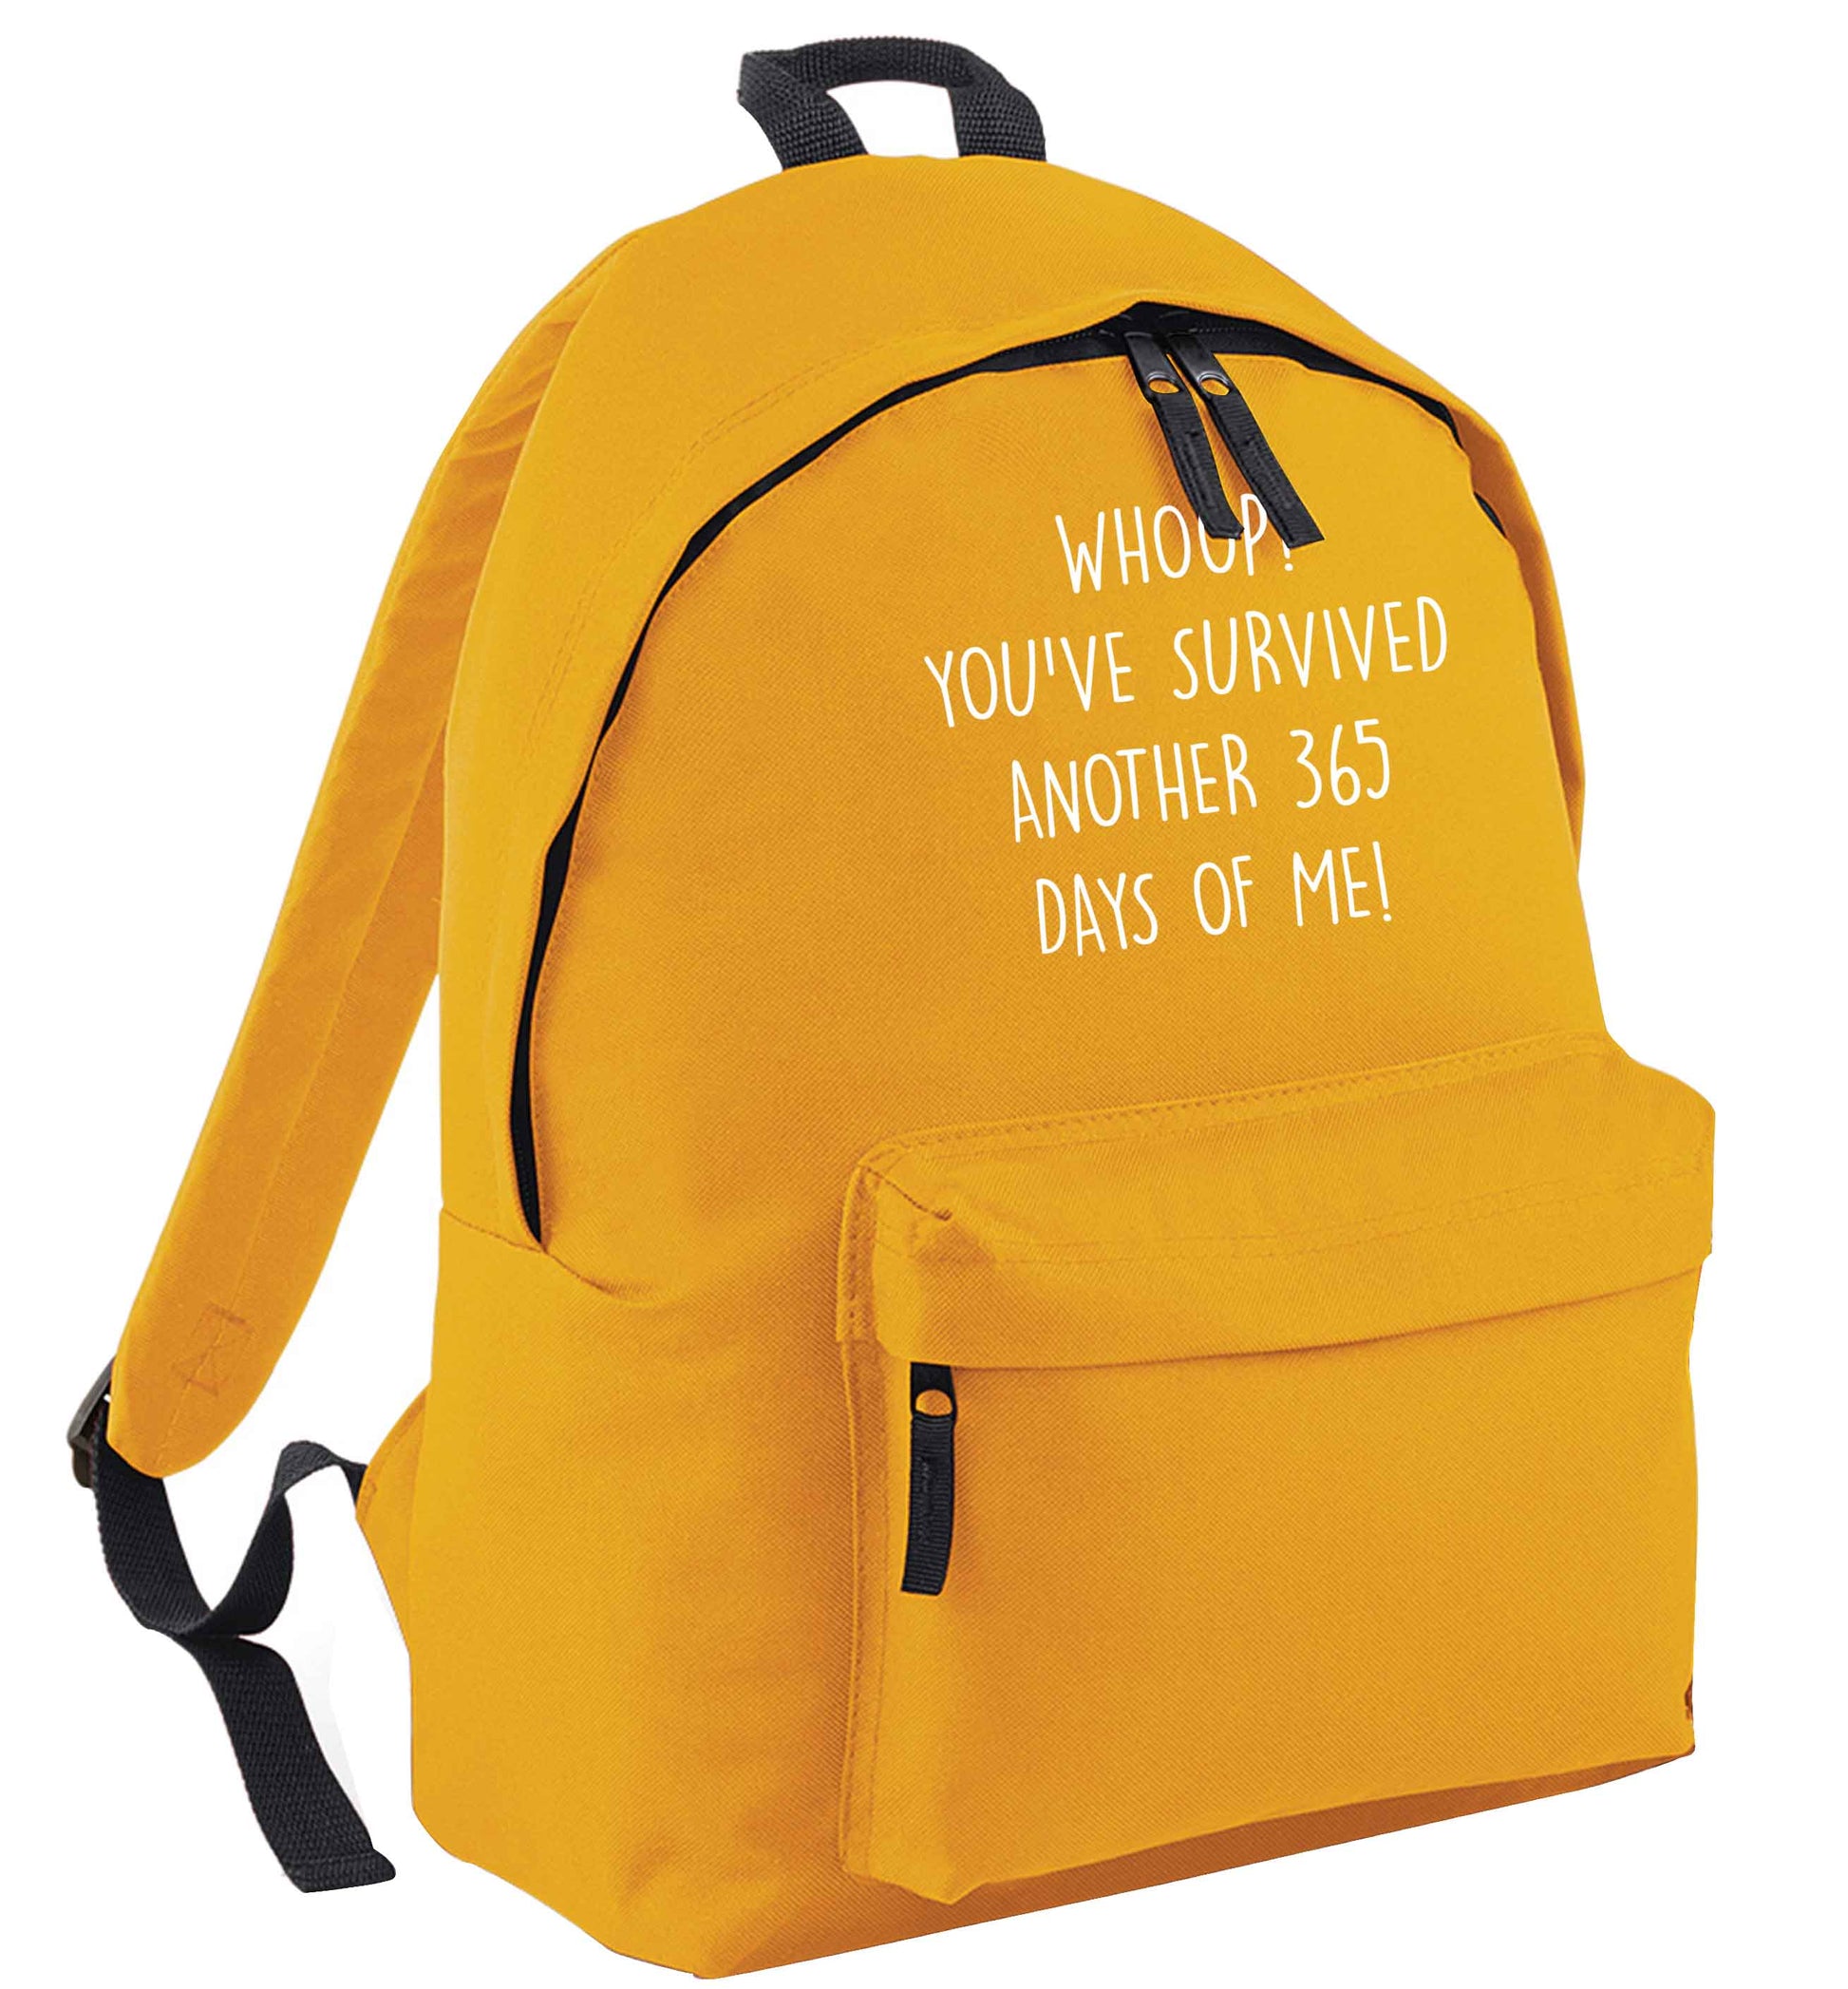 Whoop! You've survived another 365 days with me! mustard adults backpack